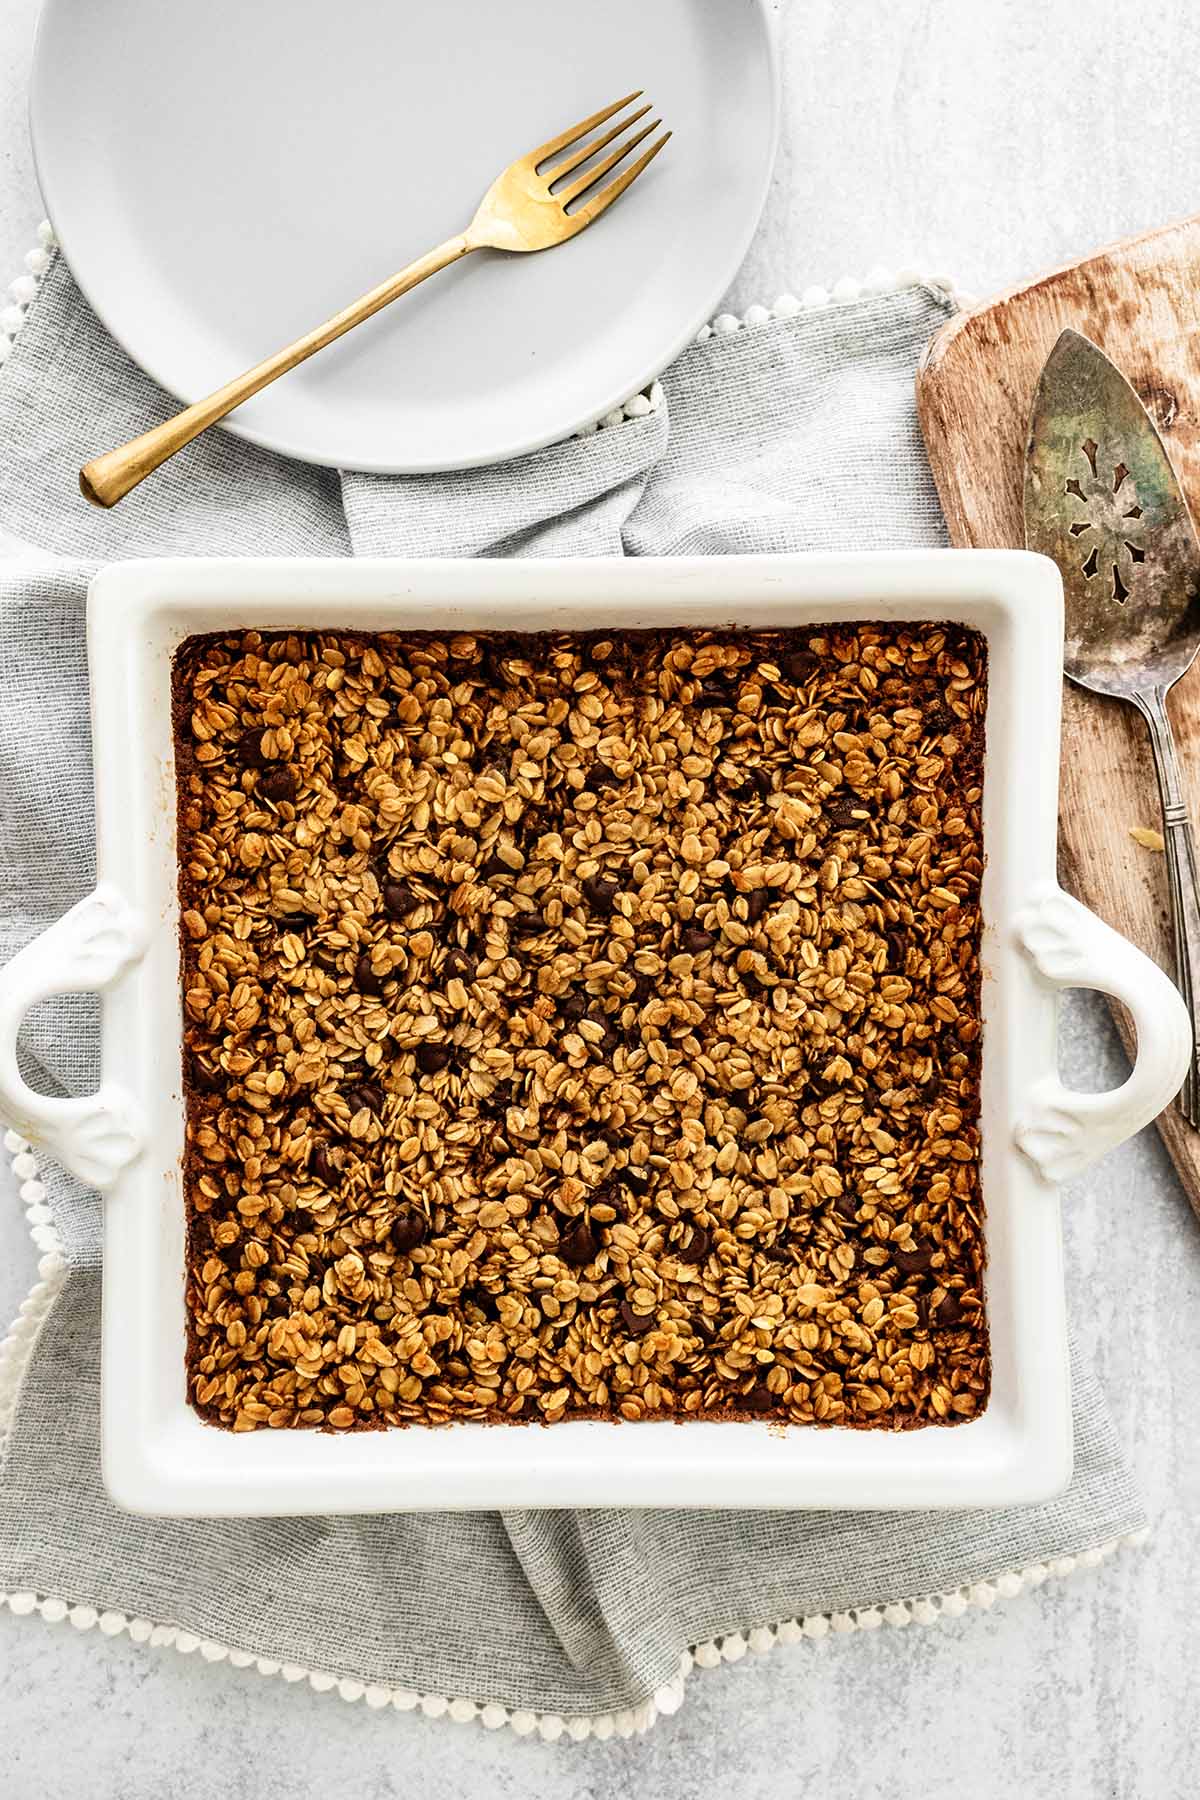 Baked oatmeal in a baking dish on a light grey napkin.